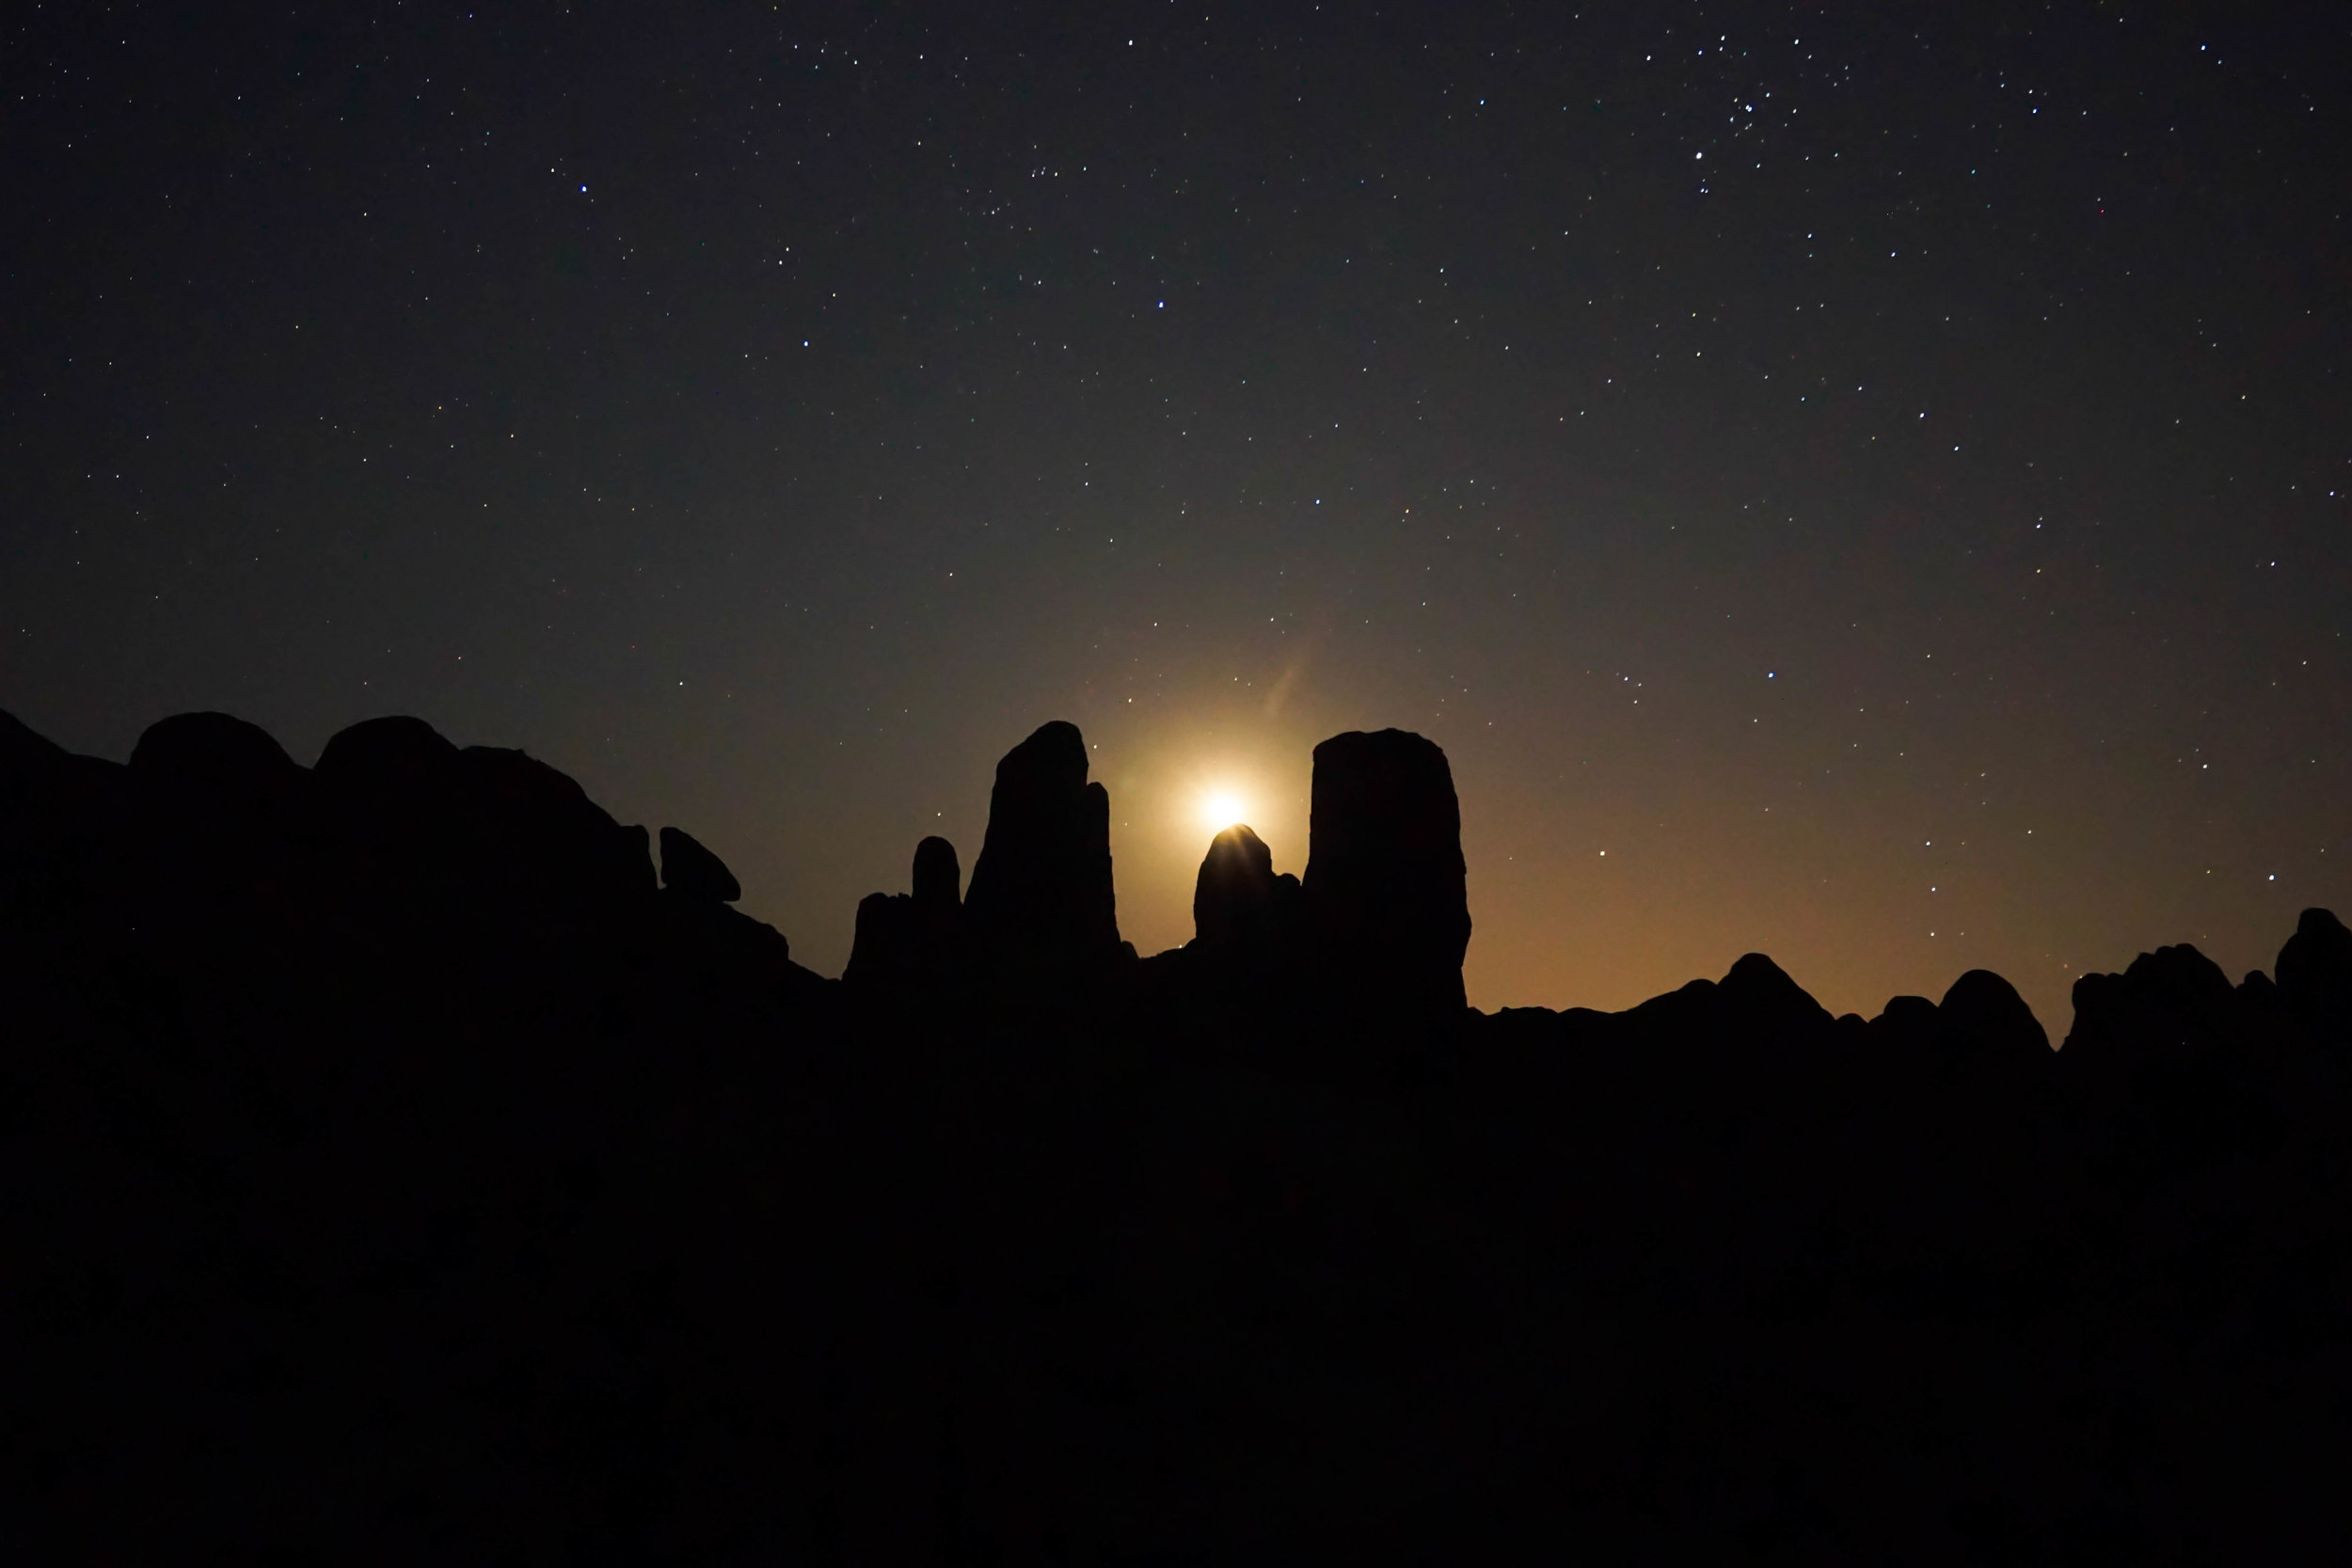 After 250 miles on the open road we reach the Hands of the Fallen Cosmonaut in the Alabama Hills just in time for the moonrise.